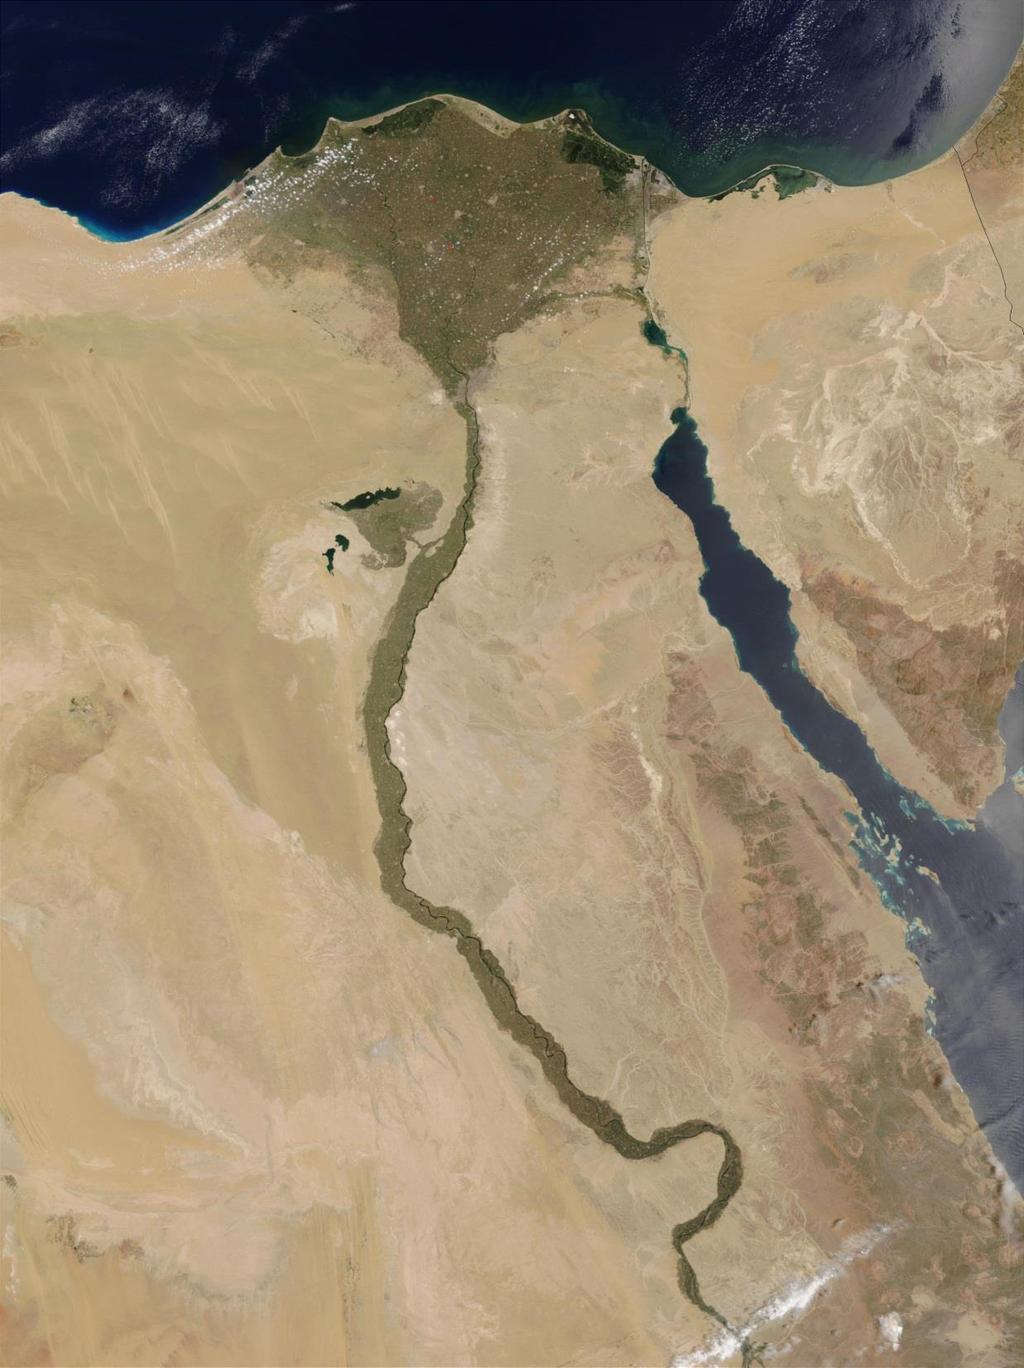 NILE DELTA Lower Egypt was centered in the river delta, a